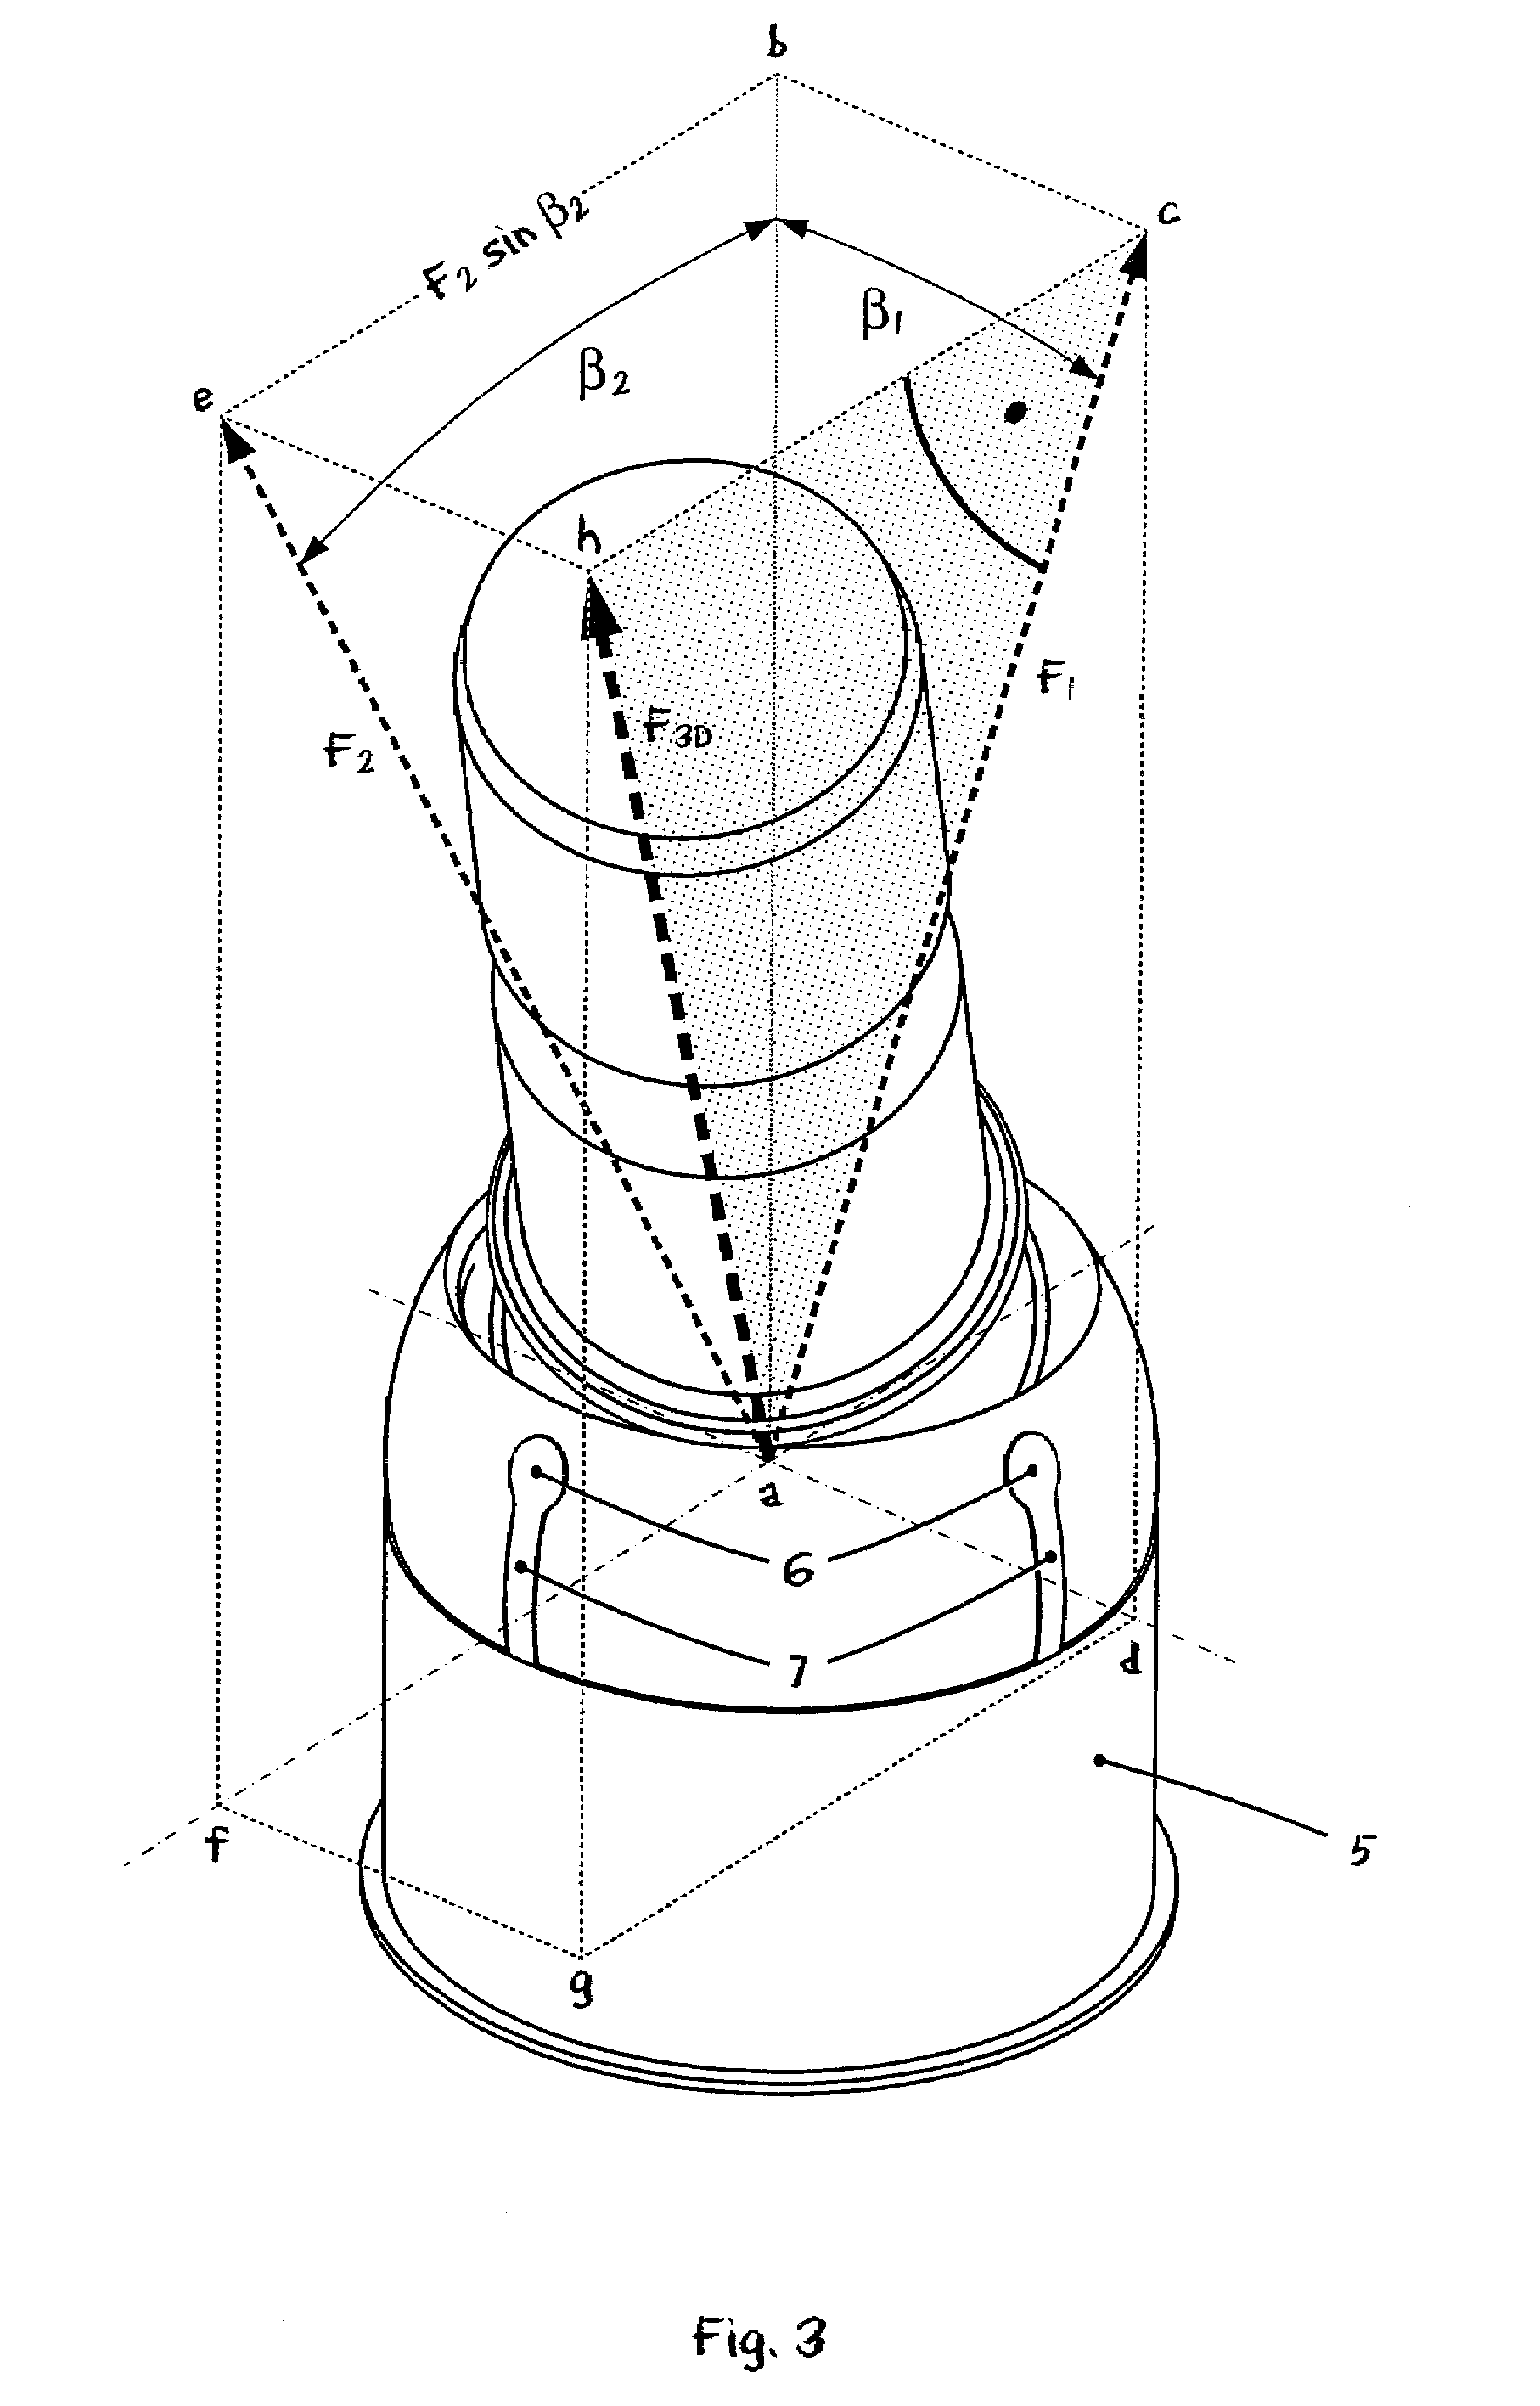 Ball and socket joint with sensor device, process for load measurement and process for wear measurement